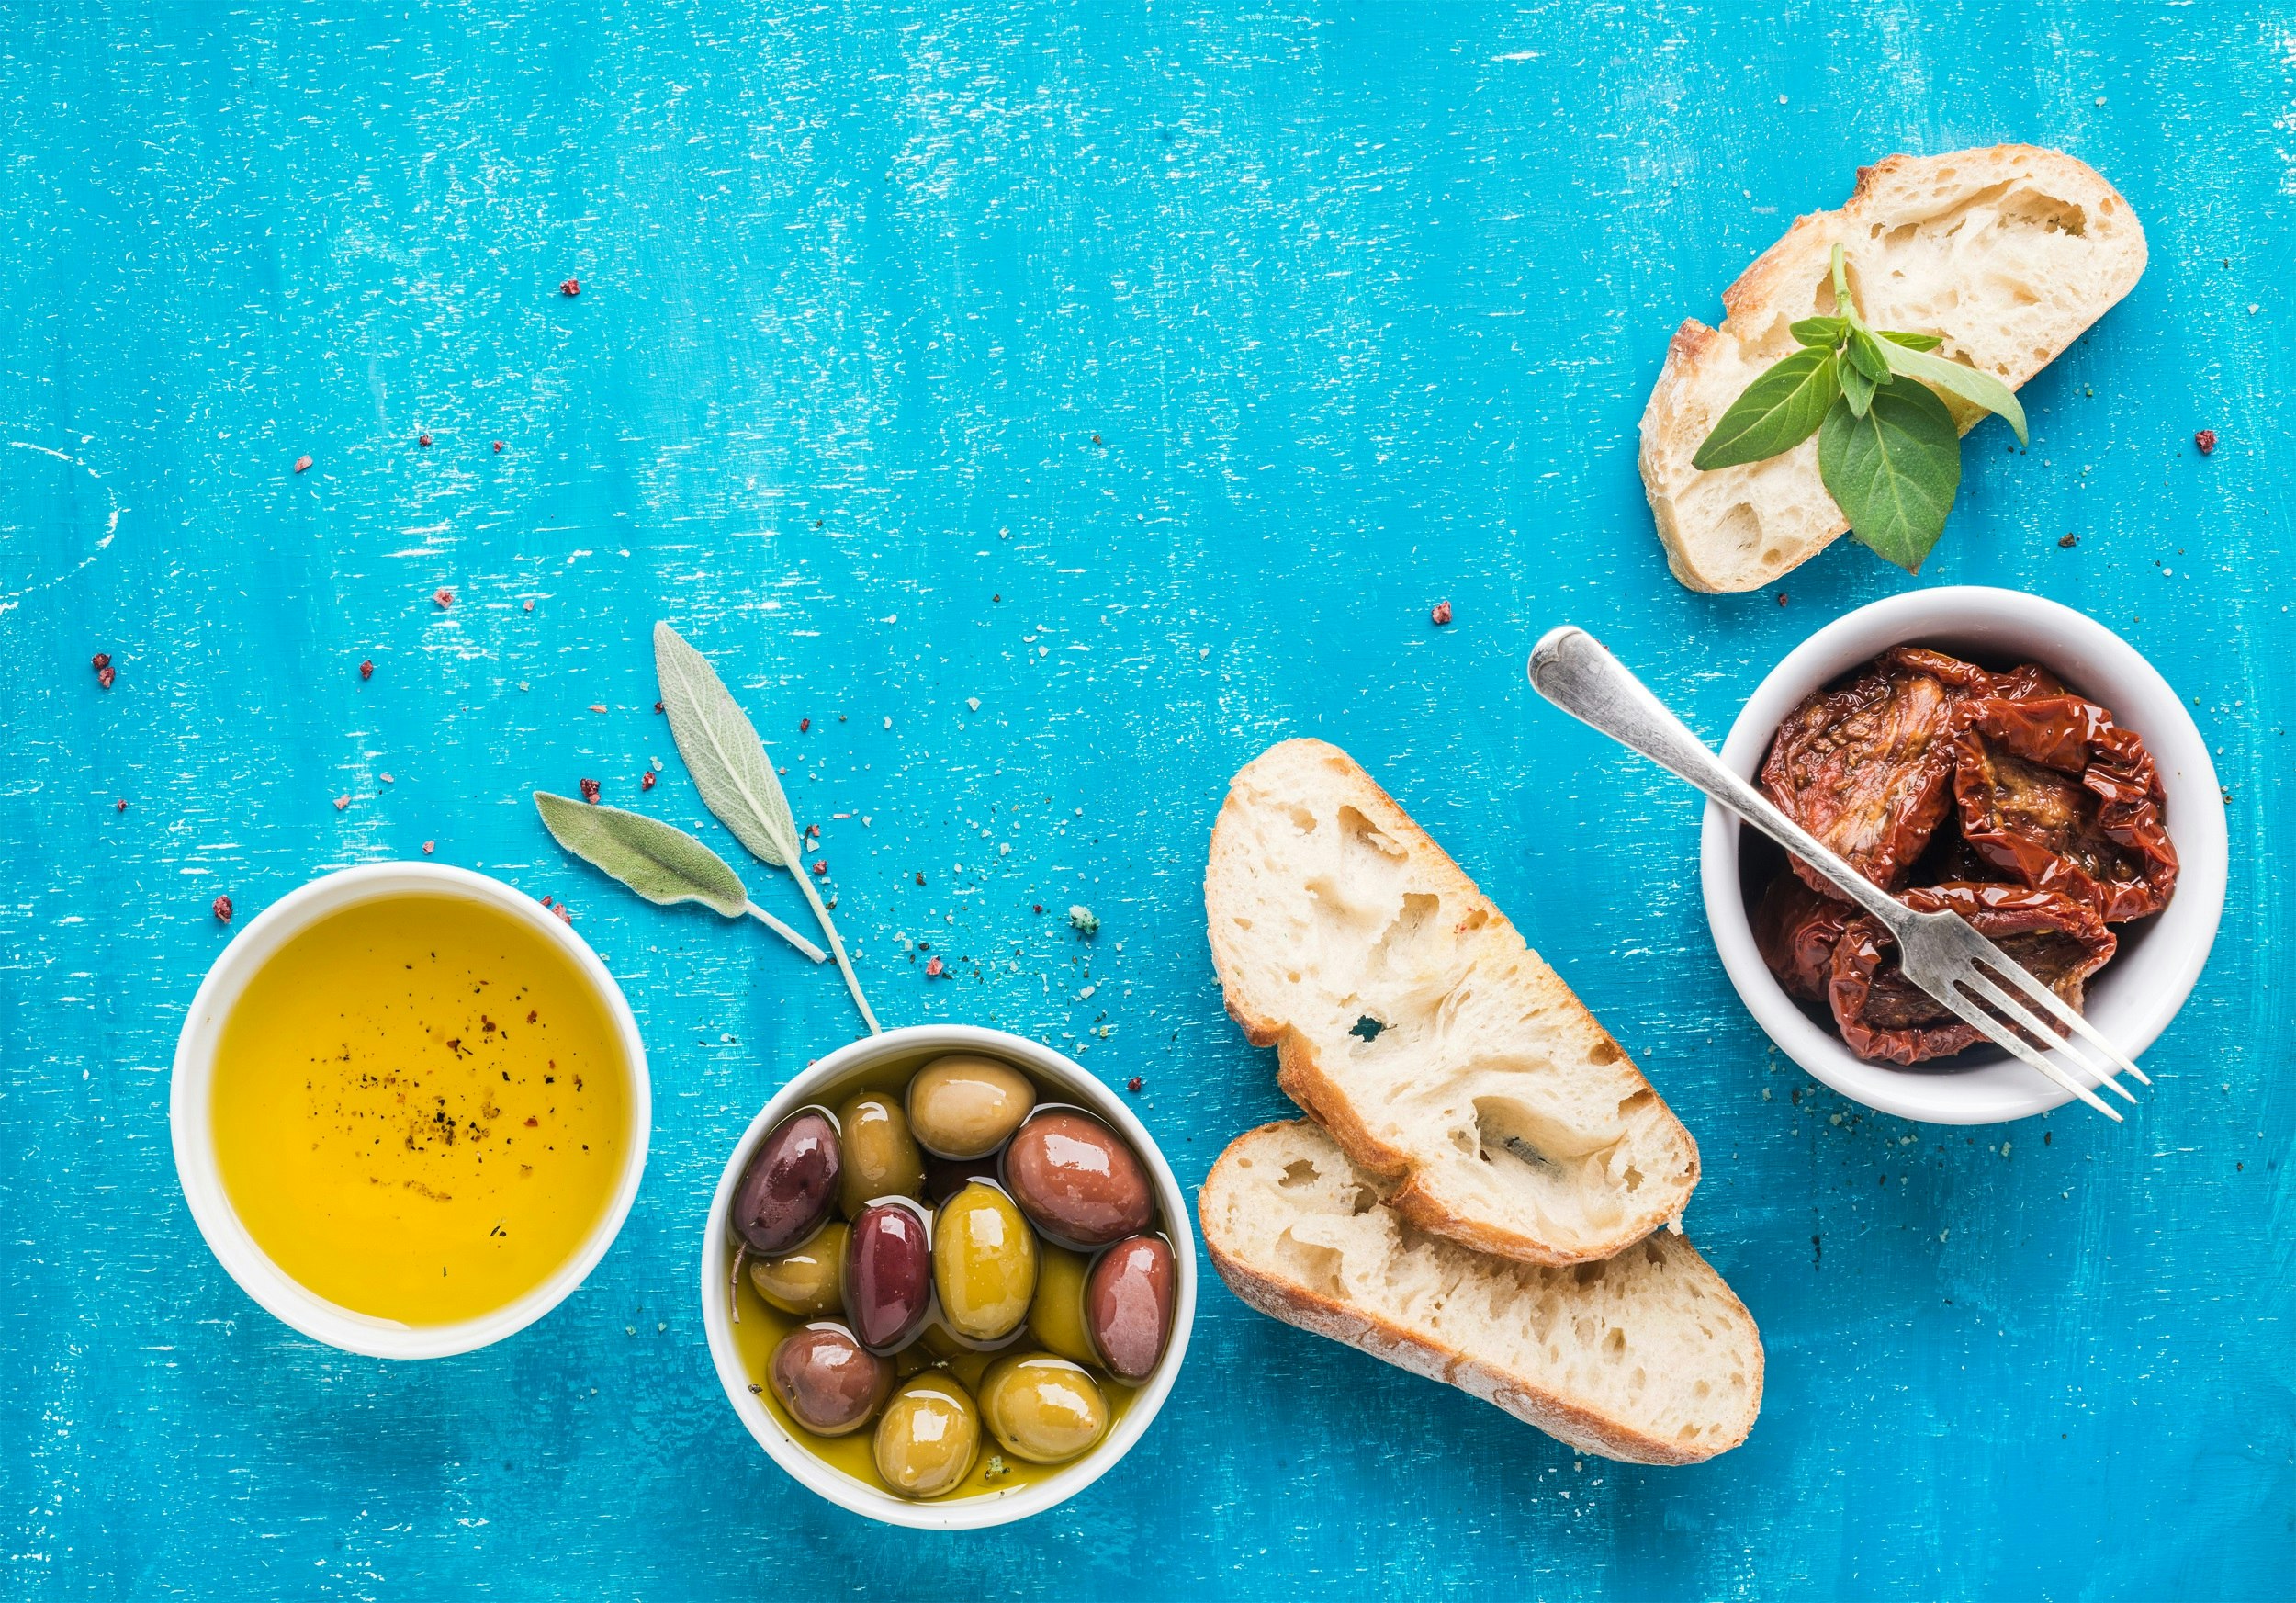 On a bright azure-coloured table sits a number of bowls; one holds olive oil, another olives and the final one sun-dried tomatoes; some slices of bread are also on the table.